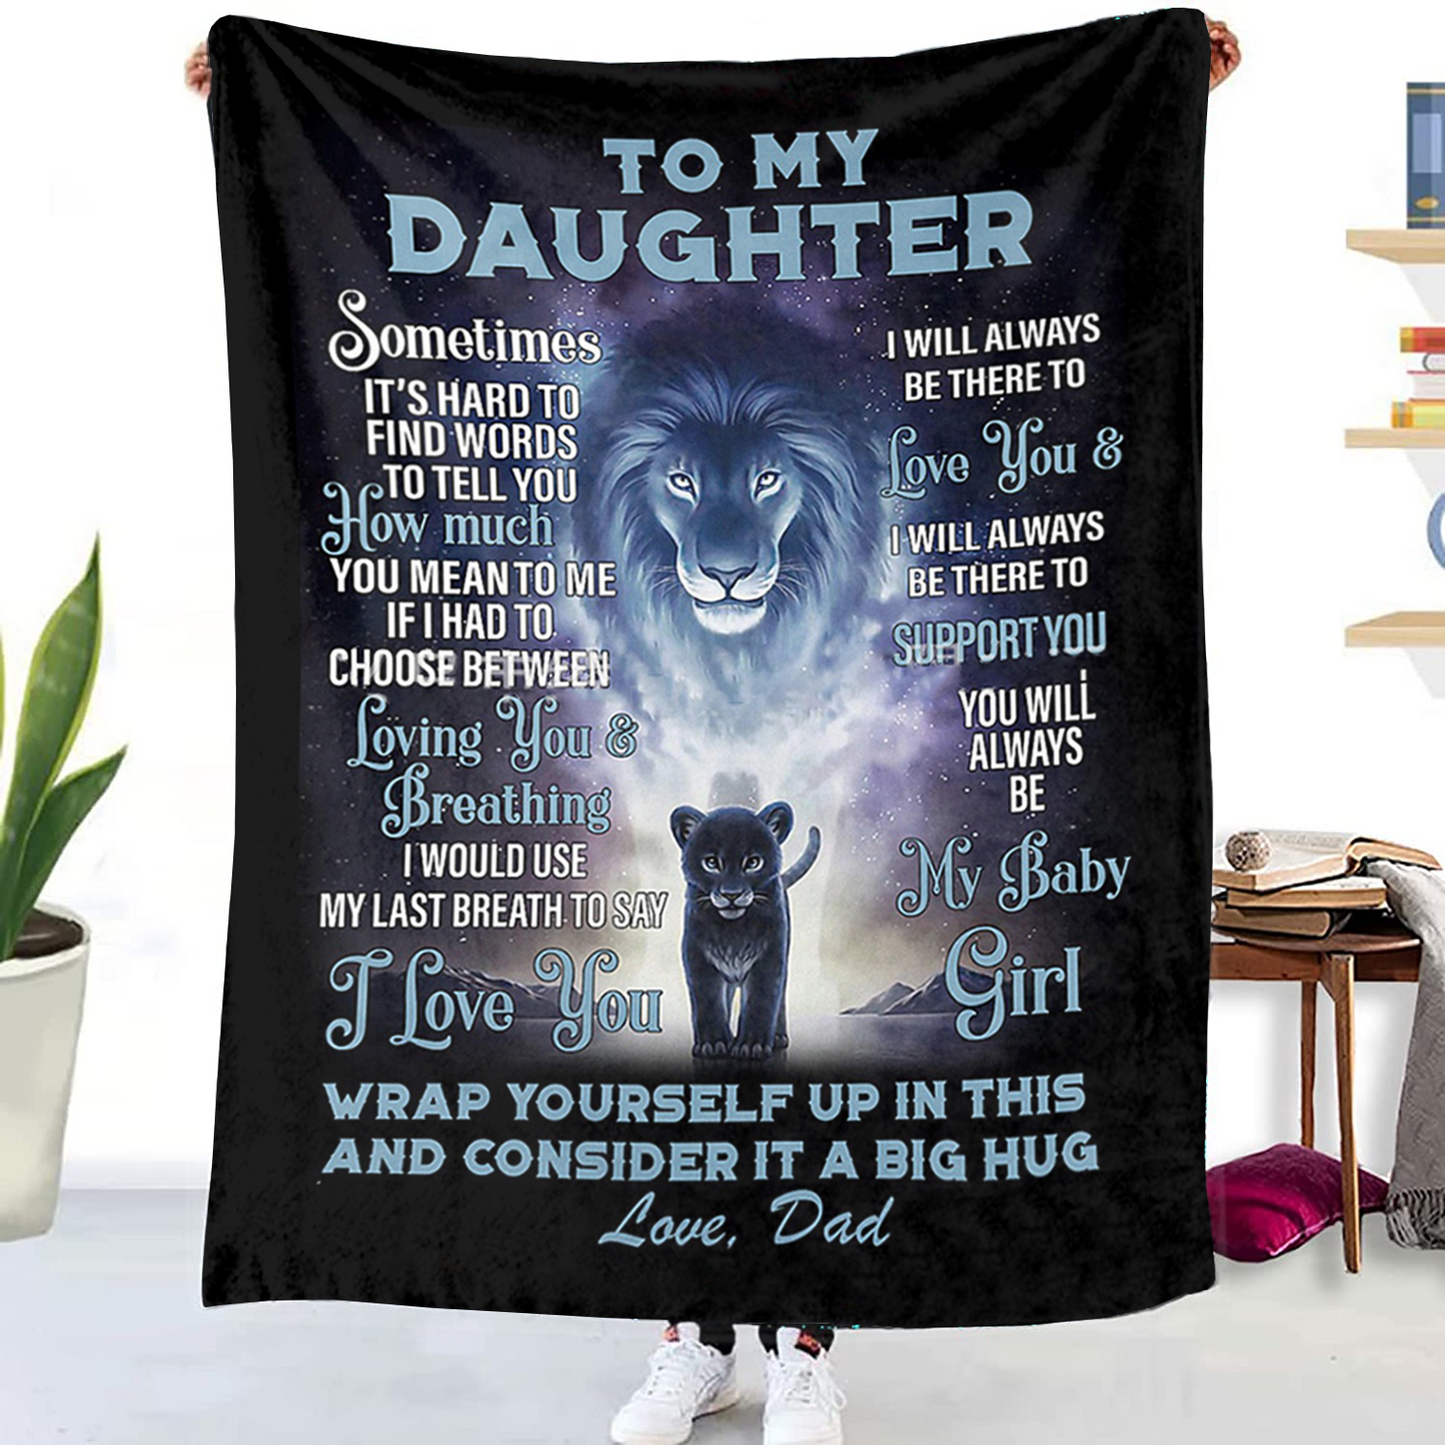 Wrap Yourself up in This and Consider a Big Hug Blanket